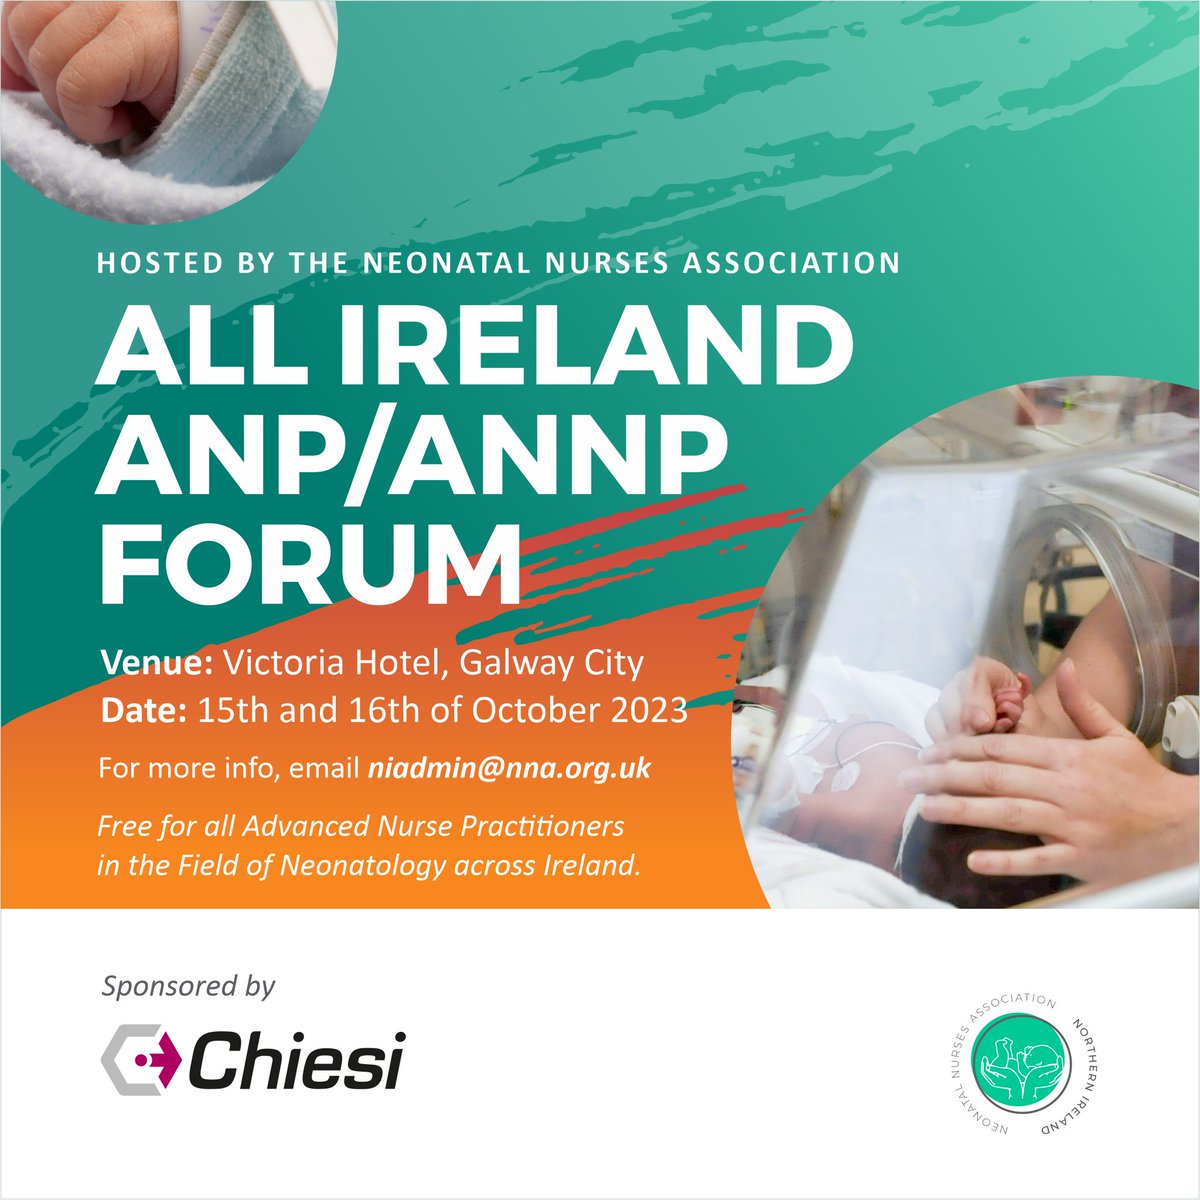 Book your place at the All Ireland ANP/ANNP Forum on the 15th & 16th October in Galway City. Meet with colleagues, network, learn & share. Be inspired. This event is hosted by the NNA NI & is free to attend thanks to @ChiesiGroup Book here nna.org.uk/events #NNANI